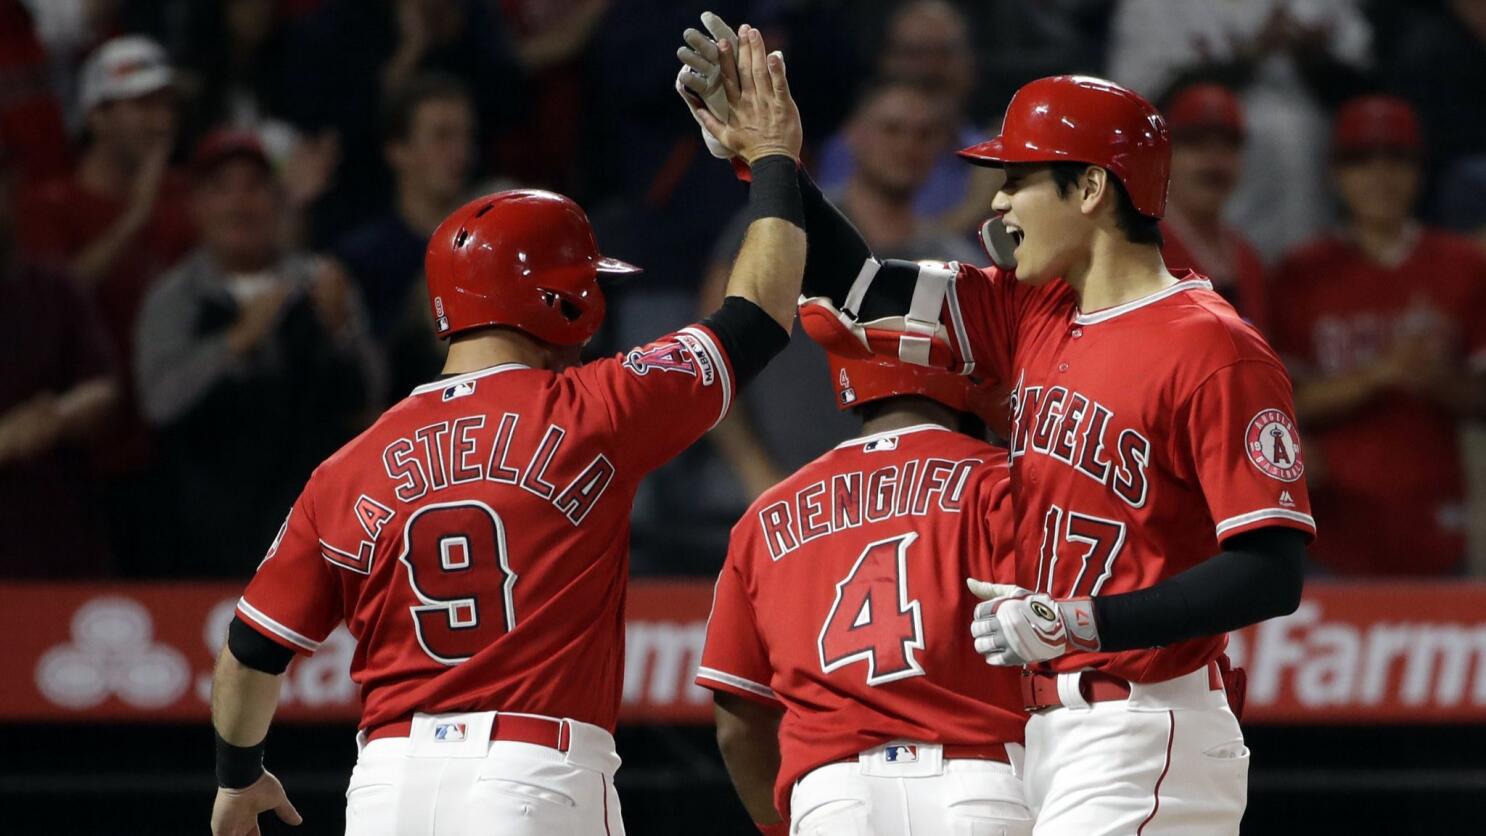 The Angels went all-in around Shohei Ohtani. In just three weeks